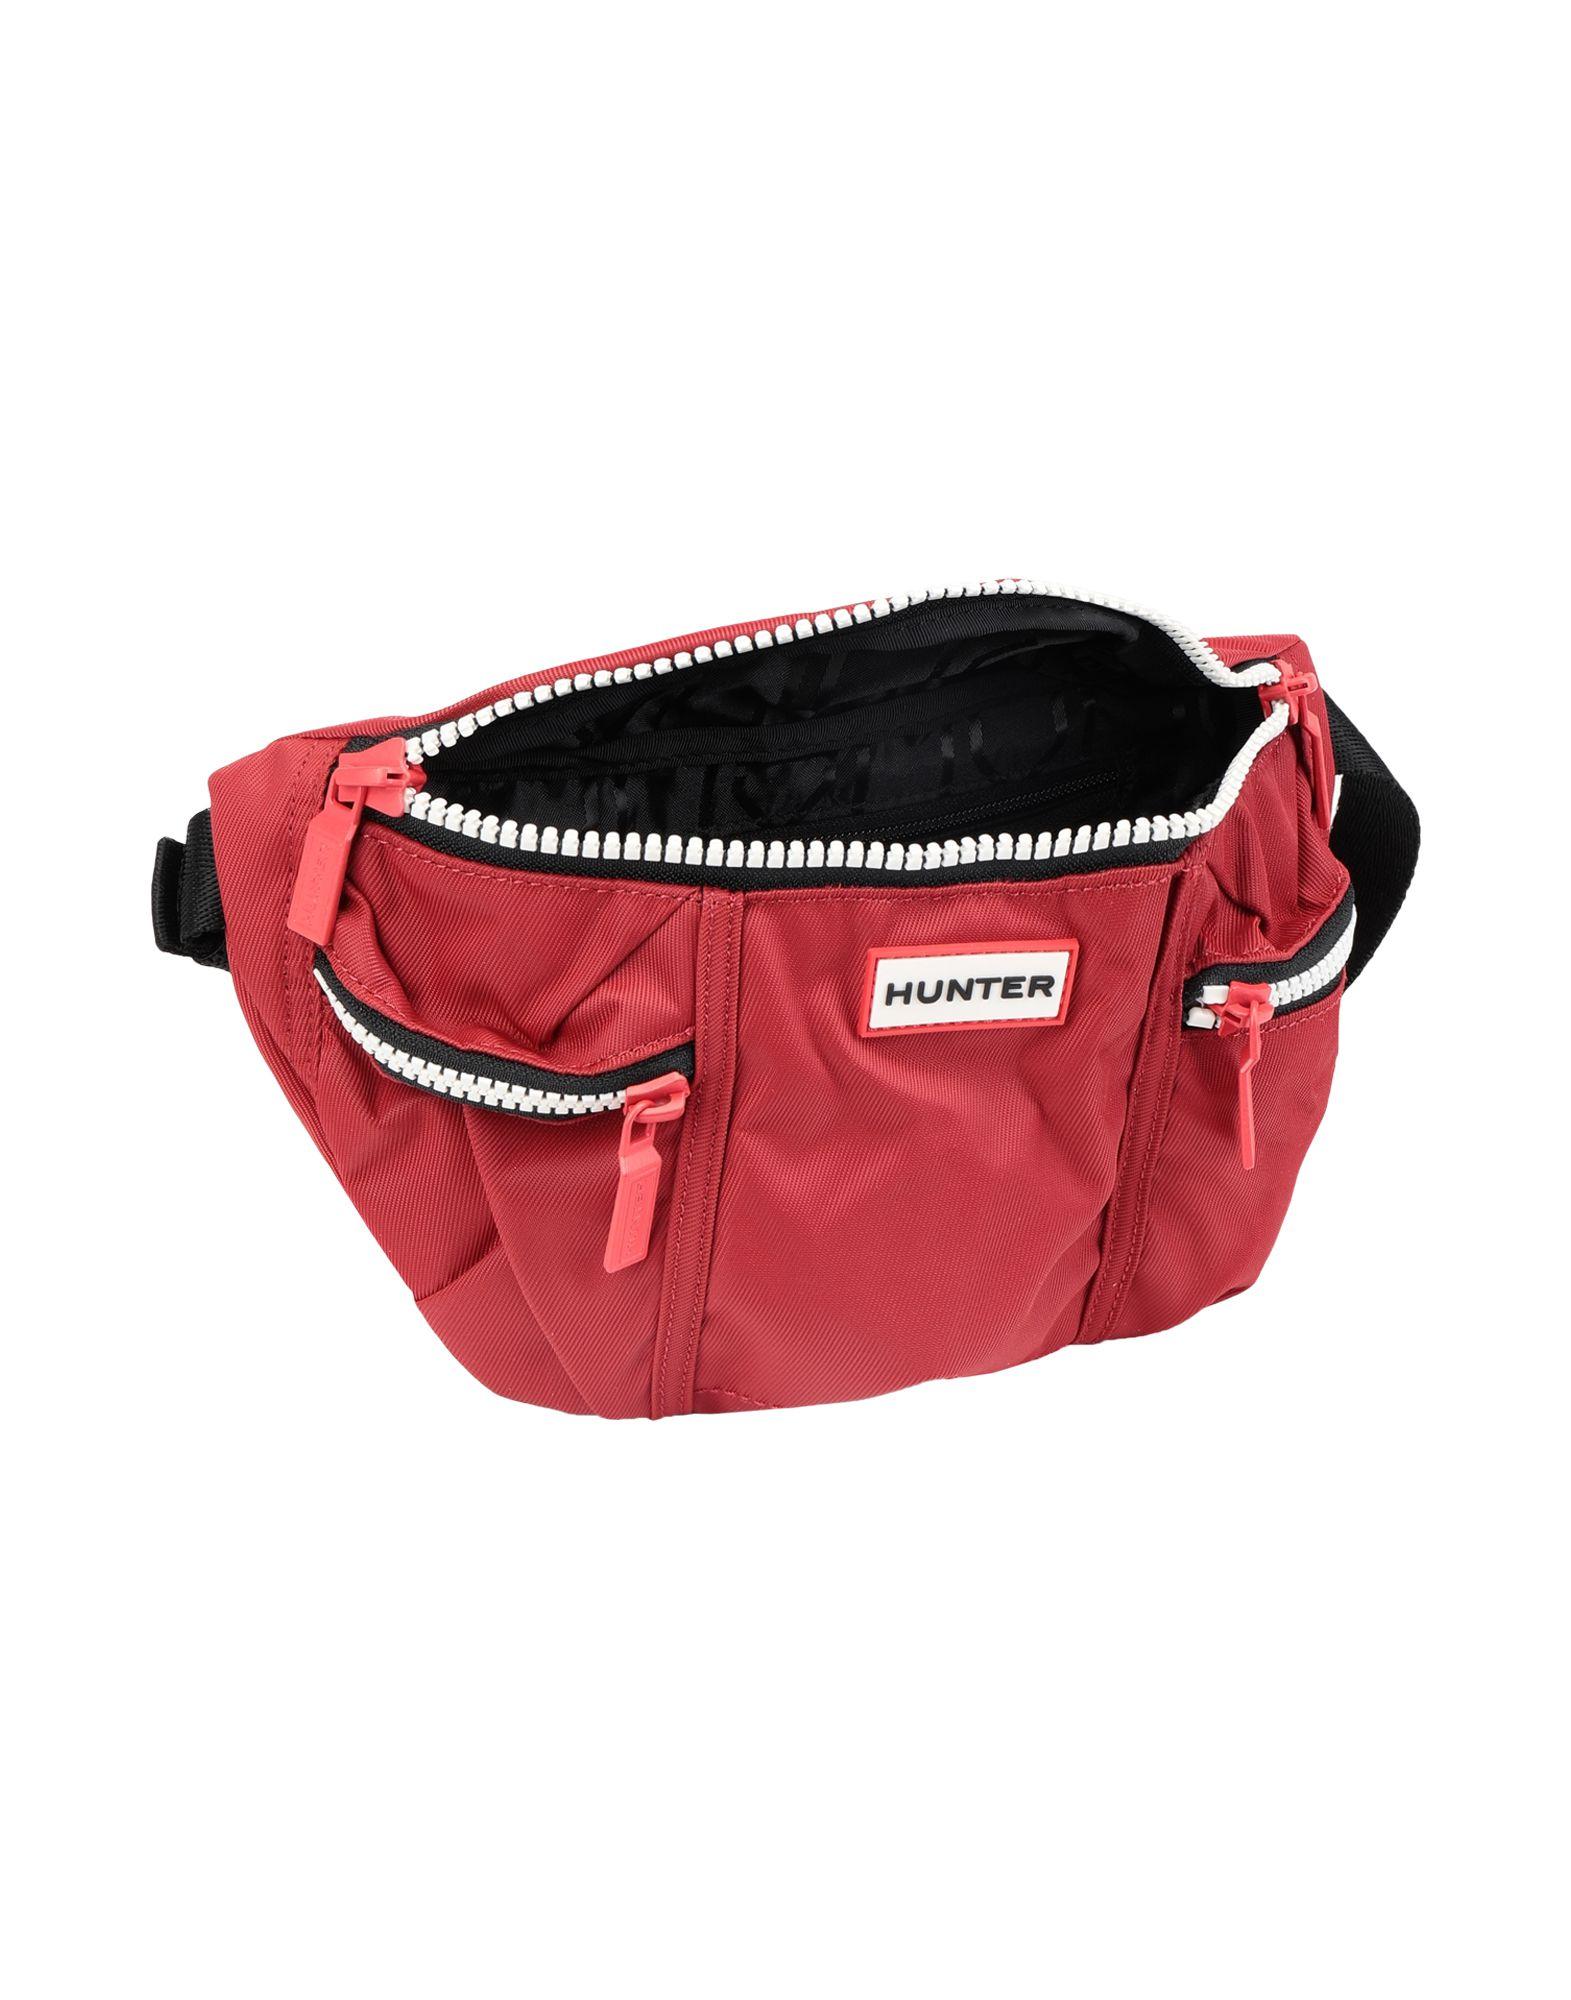 HUNTER Backpacks & Bum Bags in Red - Lyst